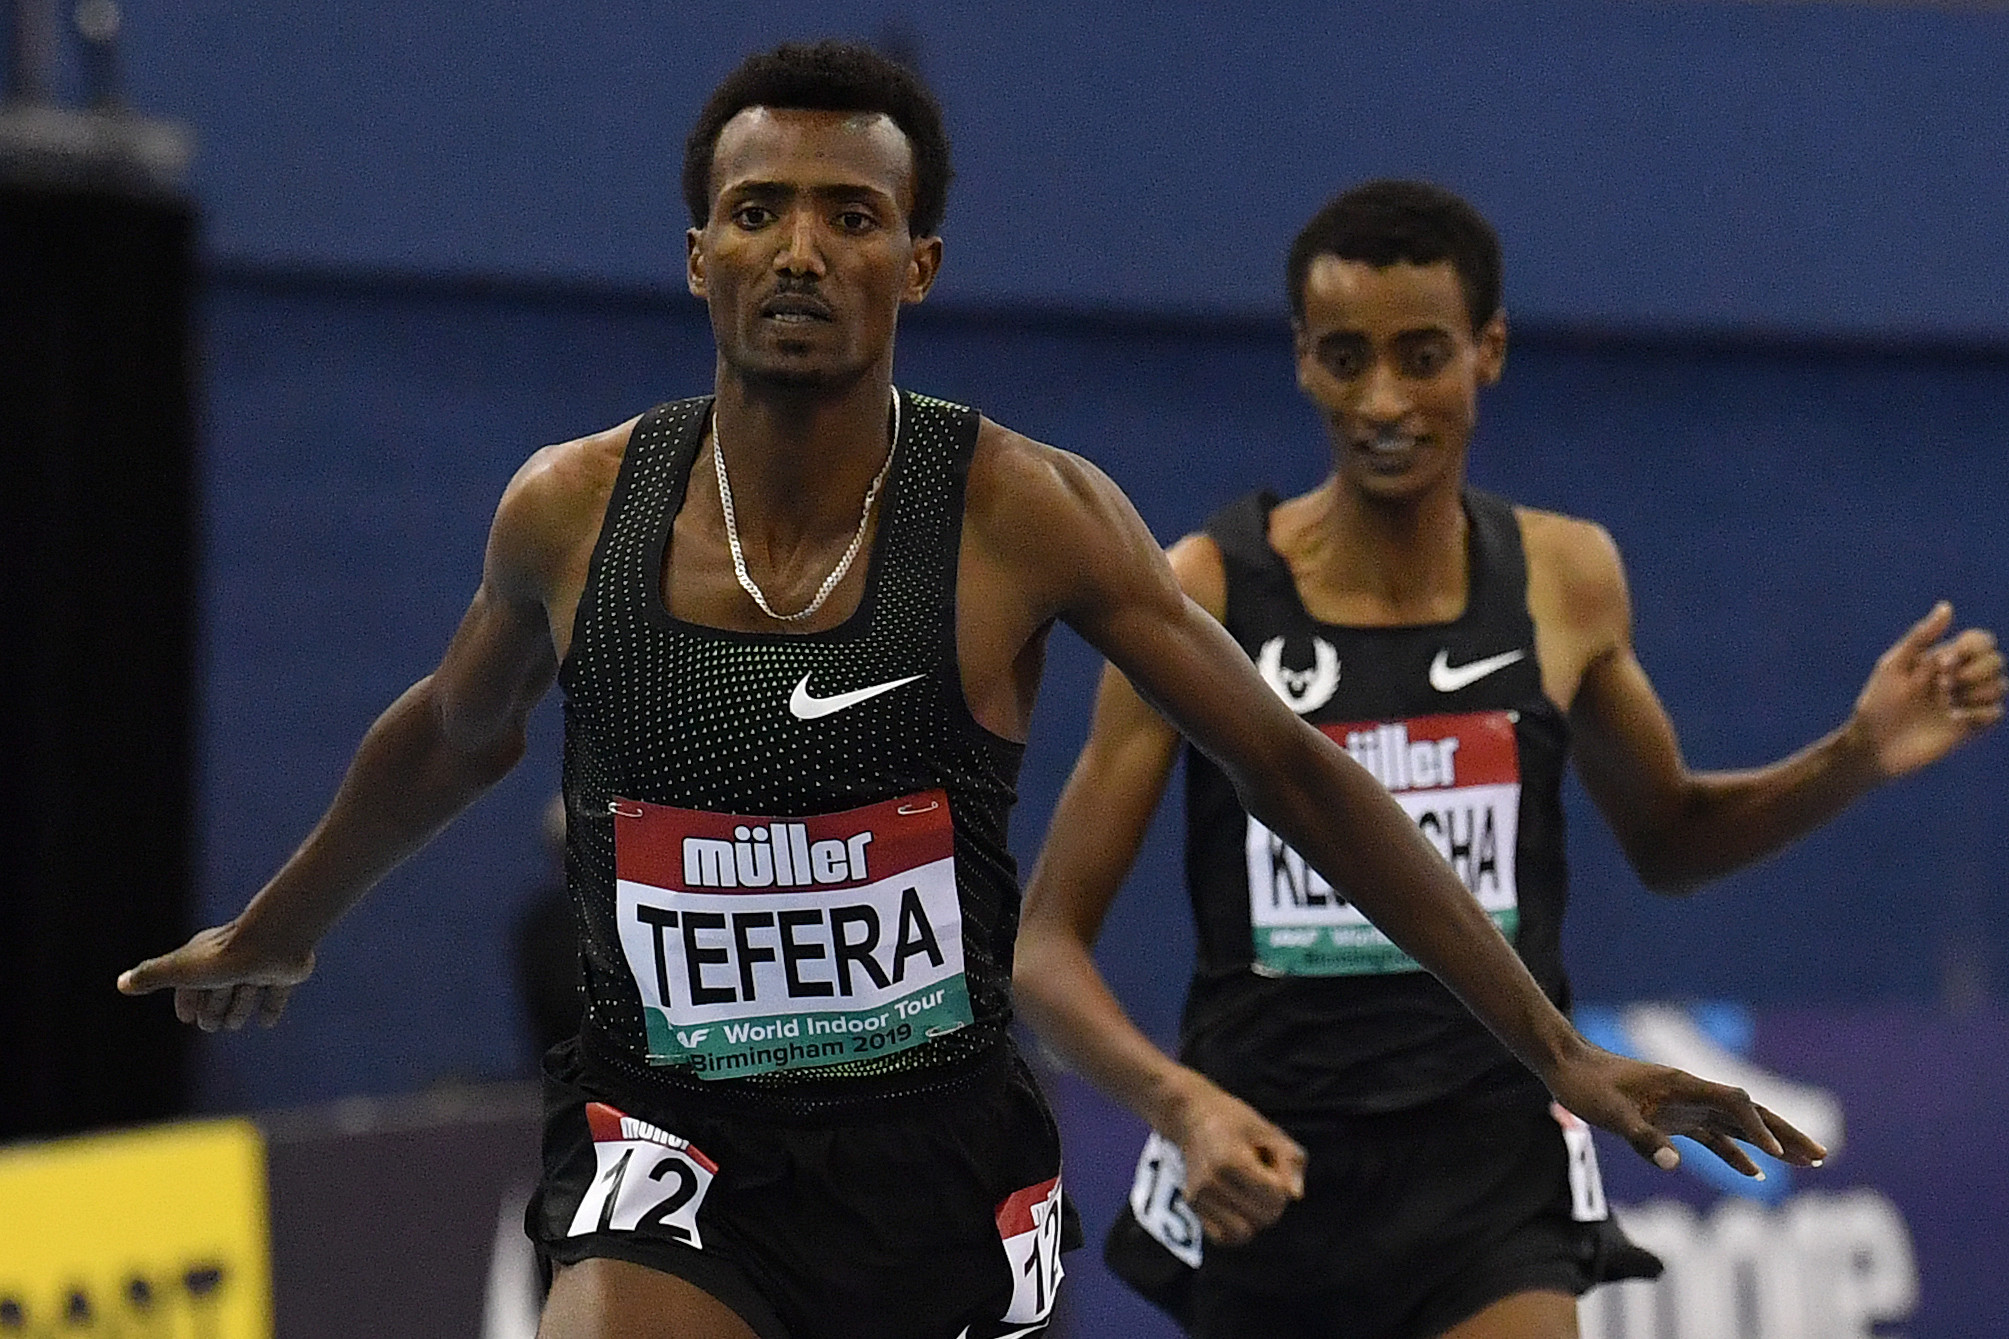 Ethiopia's Samuel Tefera will hope to follow up his world record with another victory in the final World Indoor Tour event of the season in Düsseldorf ©Getty Images